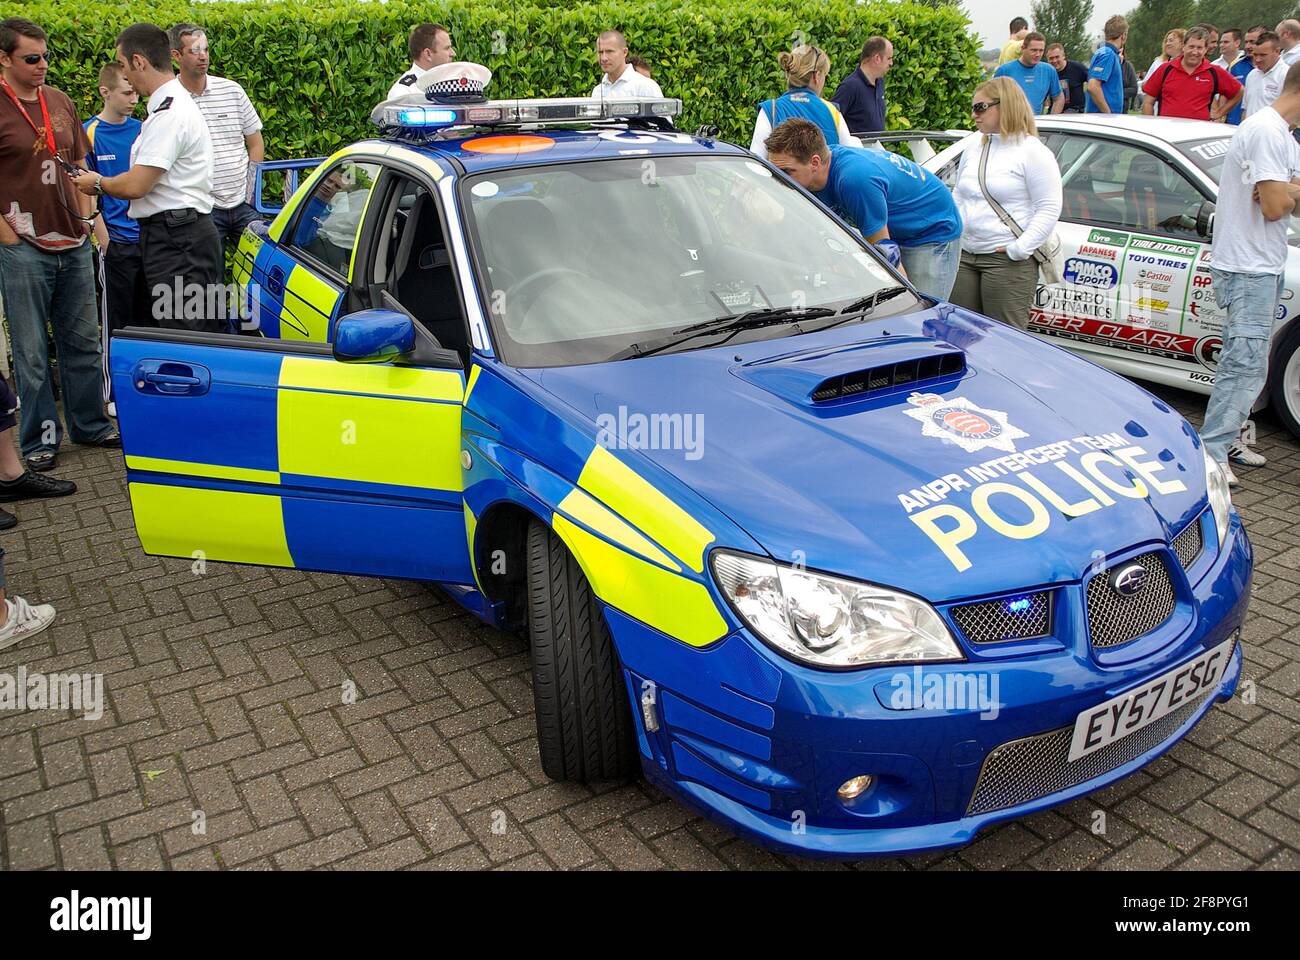 Police Interceptors. ANPR equipped police car made famous by Channel 5 TV programme, at a car event at the Prodrive racing car centre. Meeting public Stock Photo